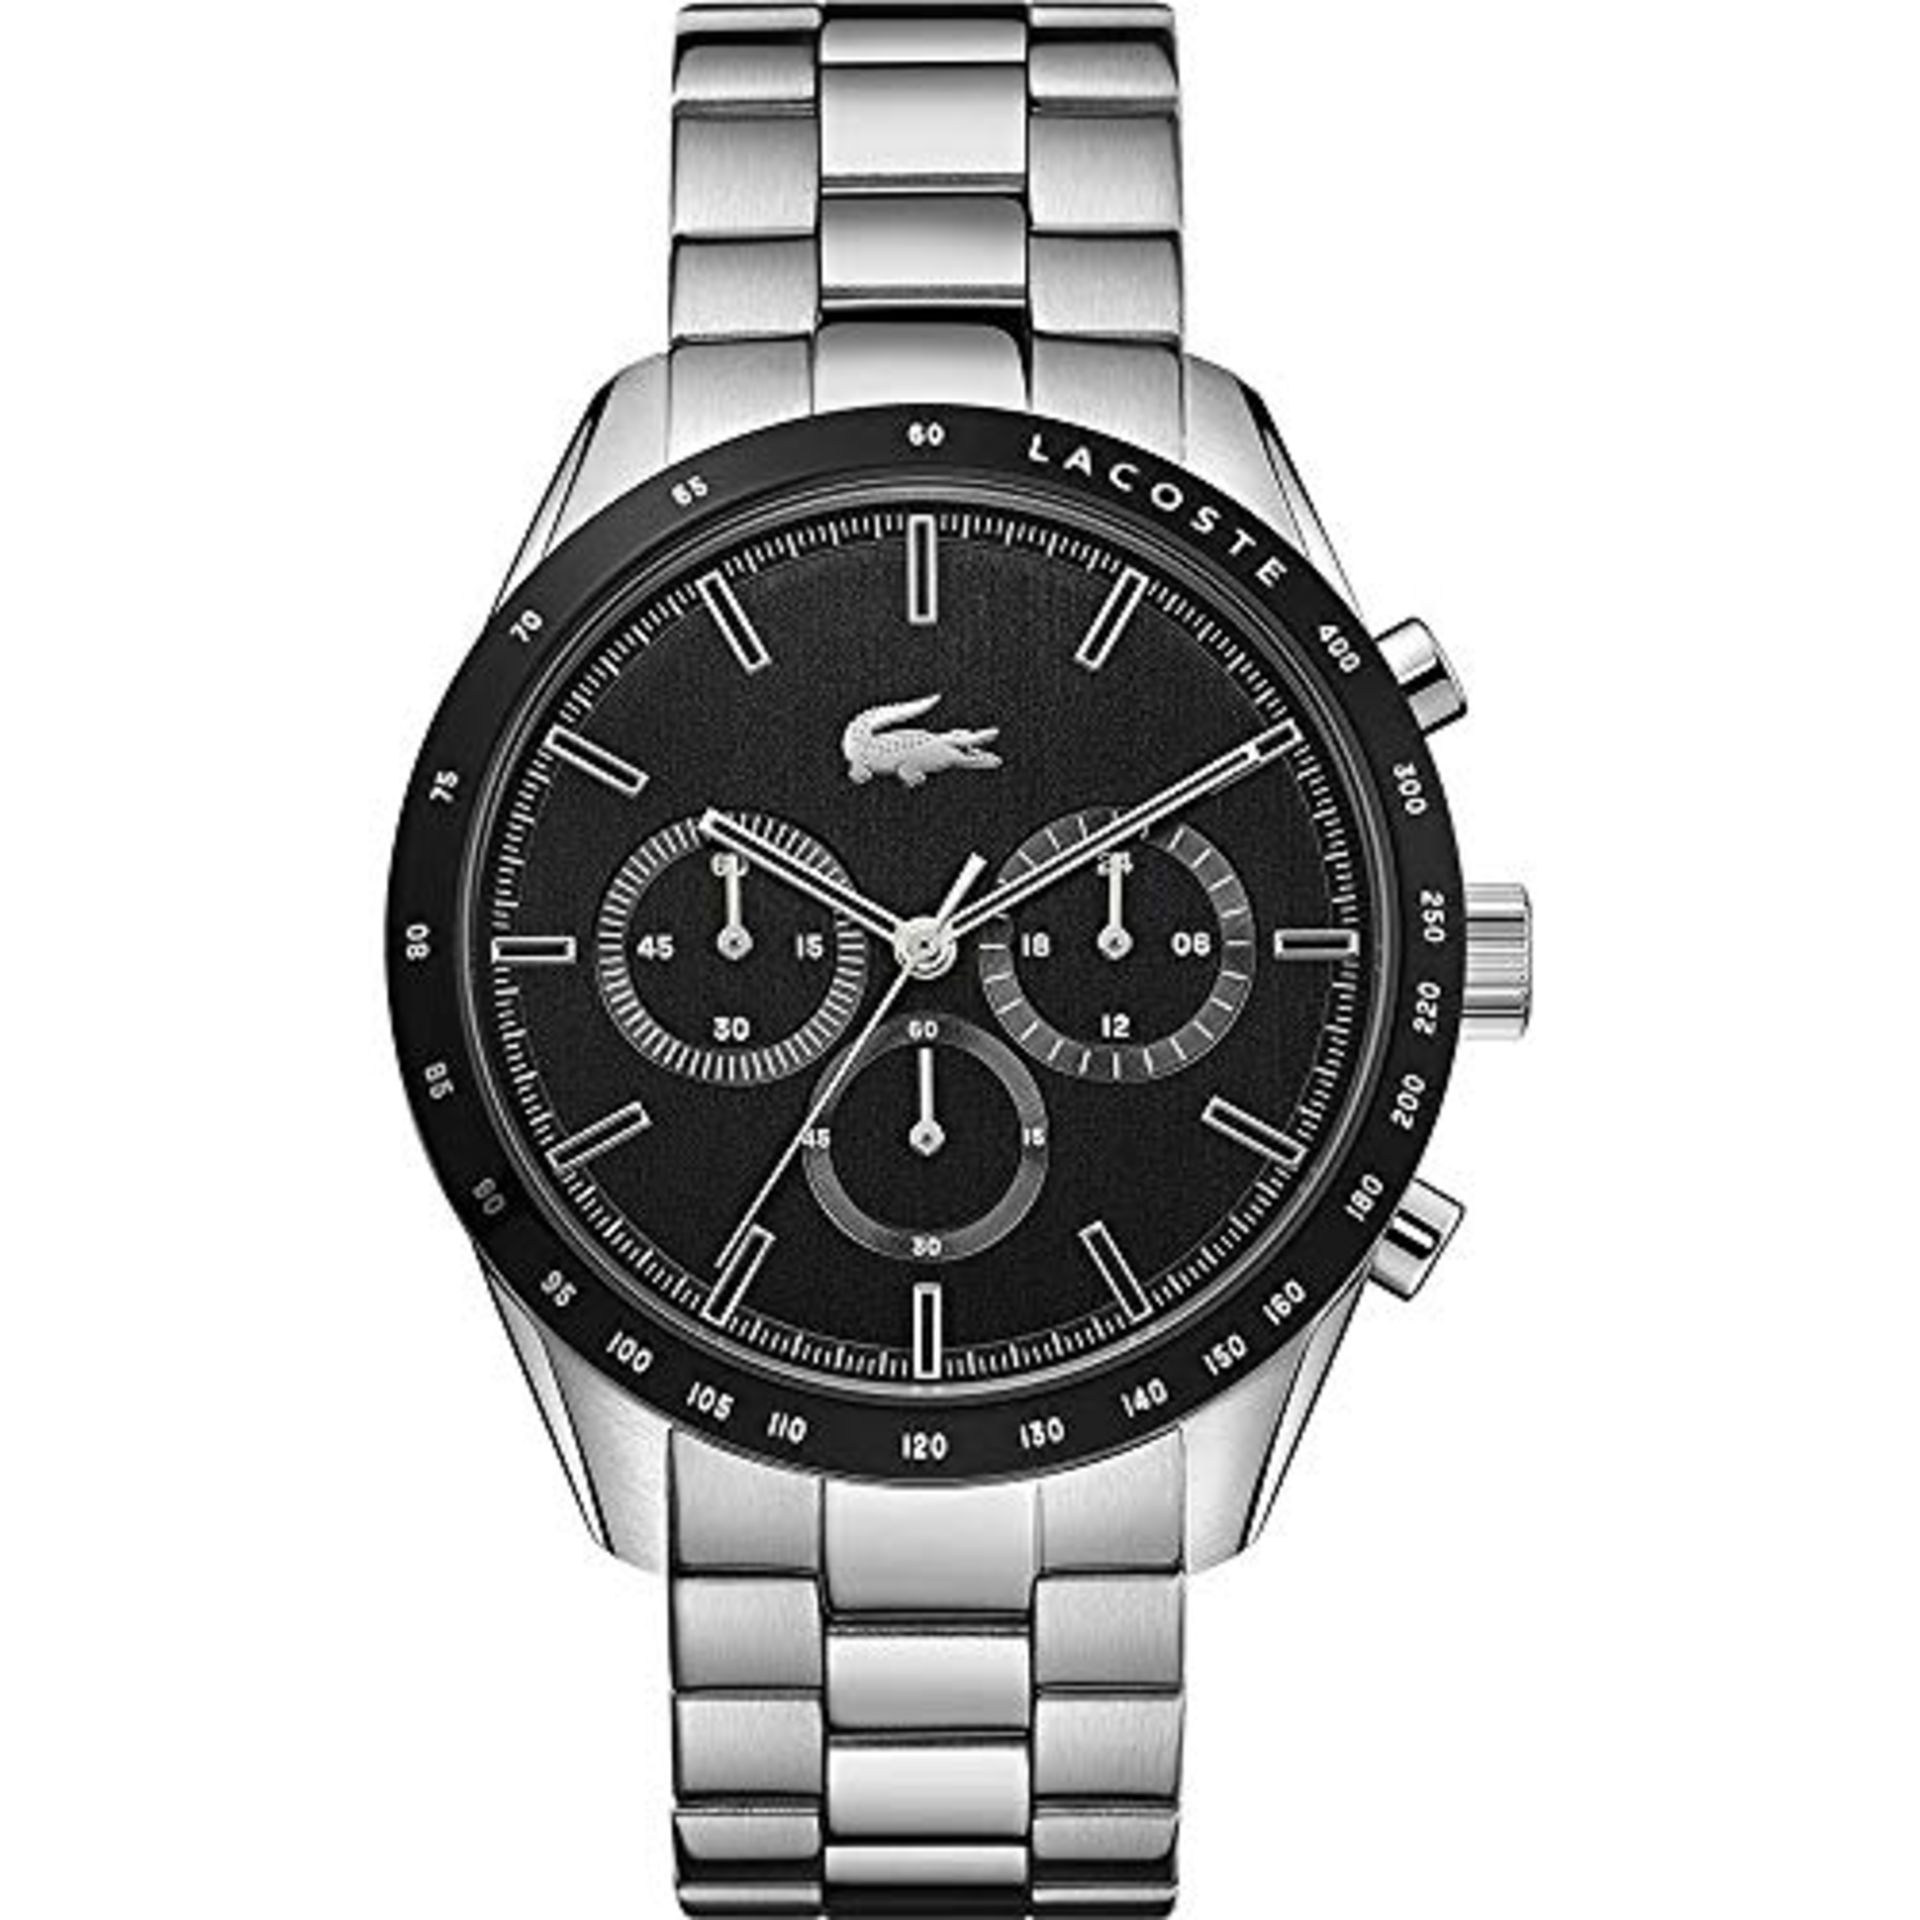 RRP £143.00 Lacoste Chronograph Quartz Watch for Men with Silver Stainless Steel Bracelet - 201107